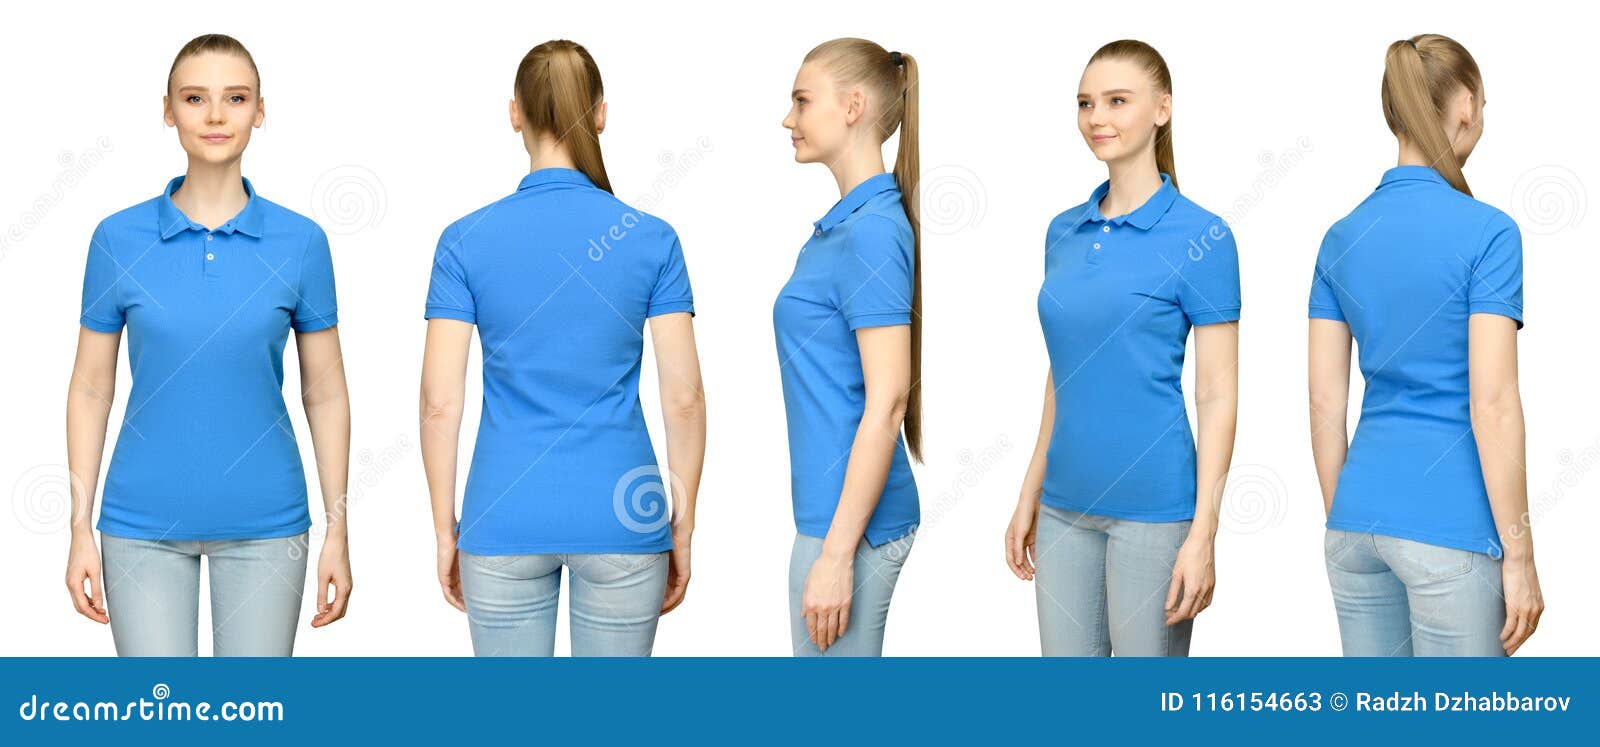 Girl In Blank Blue Polo Shirt Mockup Design For Print And ...